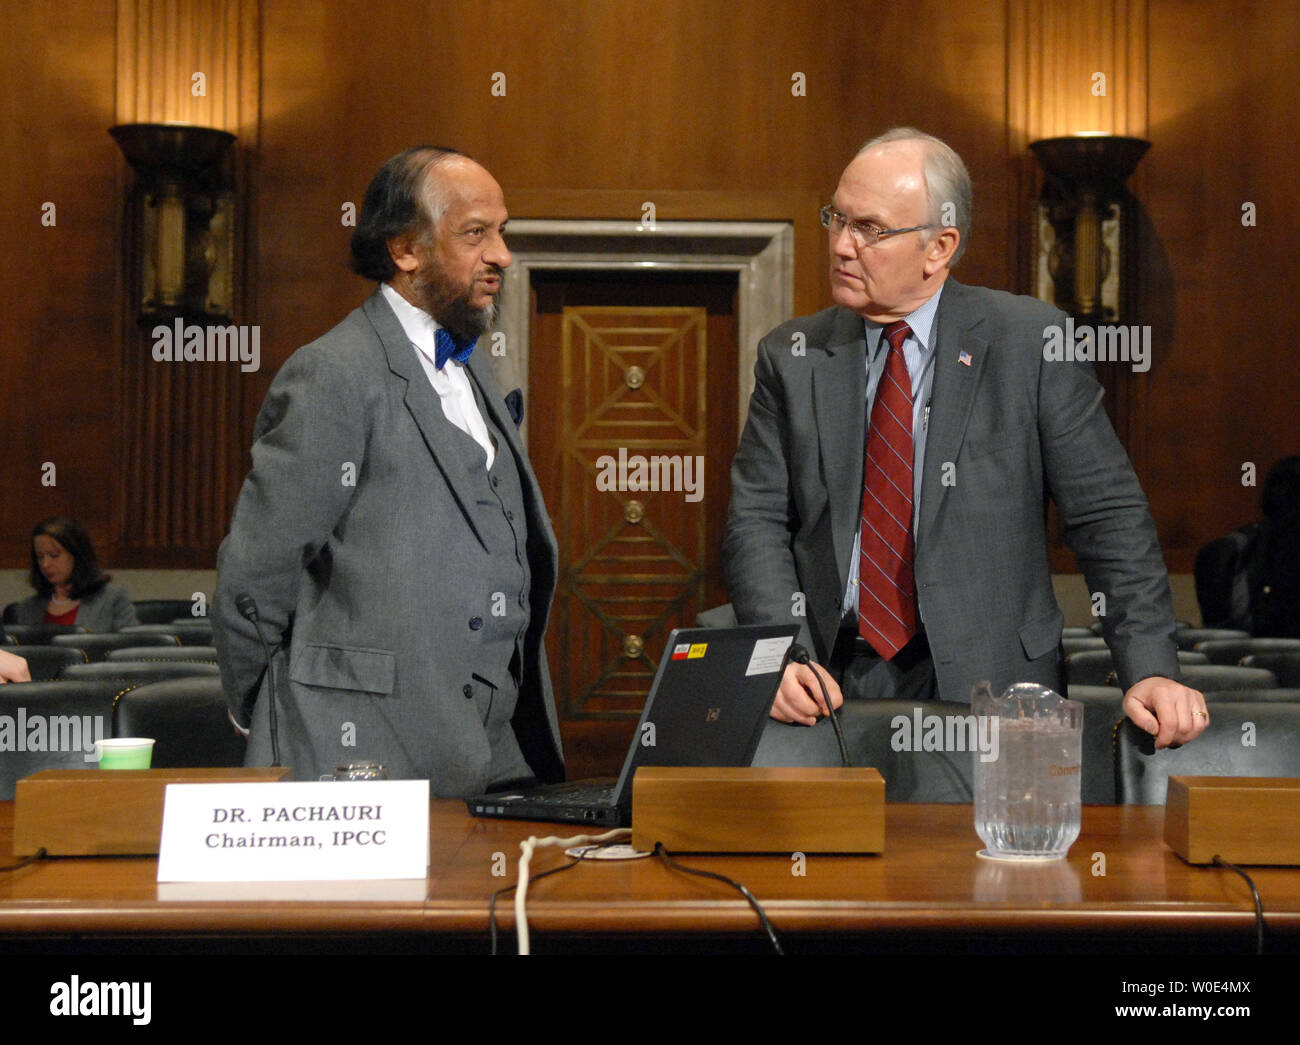 Rajenda Pachauri (L), chairman of the United Nation's Intergovernmental Panel on Climate Change, talks to Sen. Larry Craig (R-ID) prior to a Senate Environment and Public Works Committee hearing on global warming in Washington on January 30, 2008. (UPI Photo/Kevin Dietsch) Stock Photo